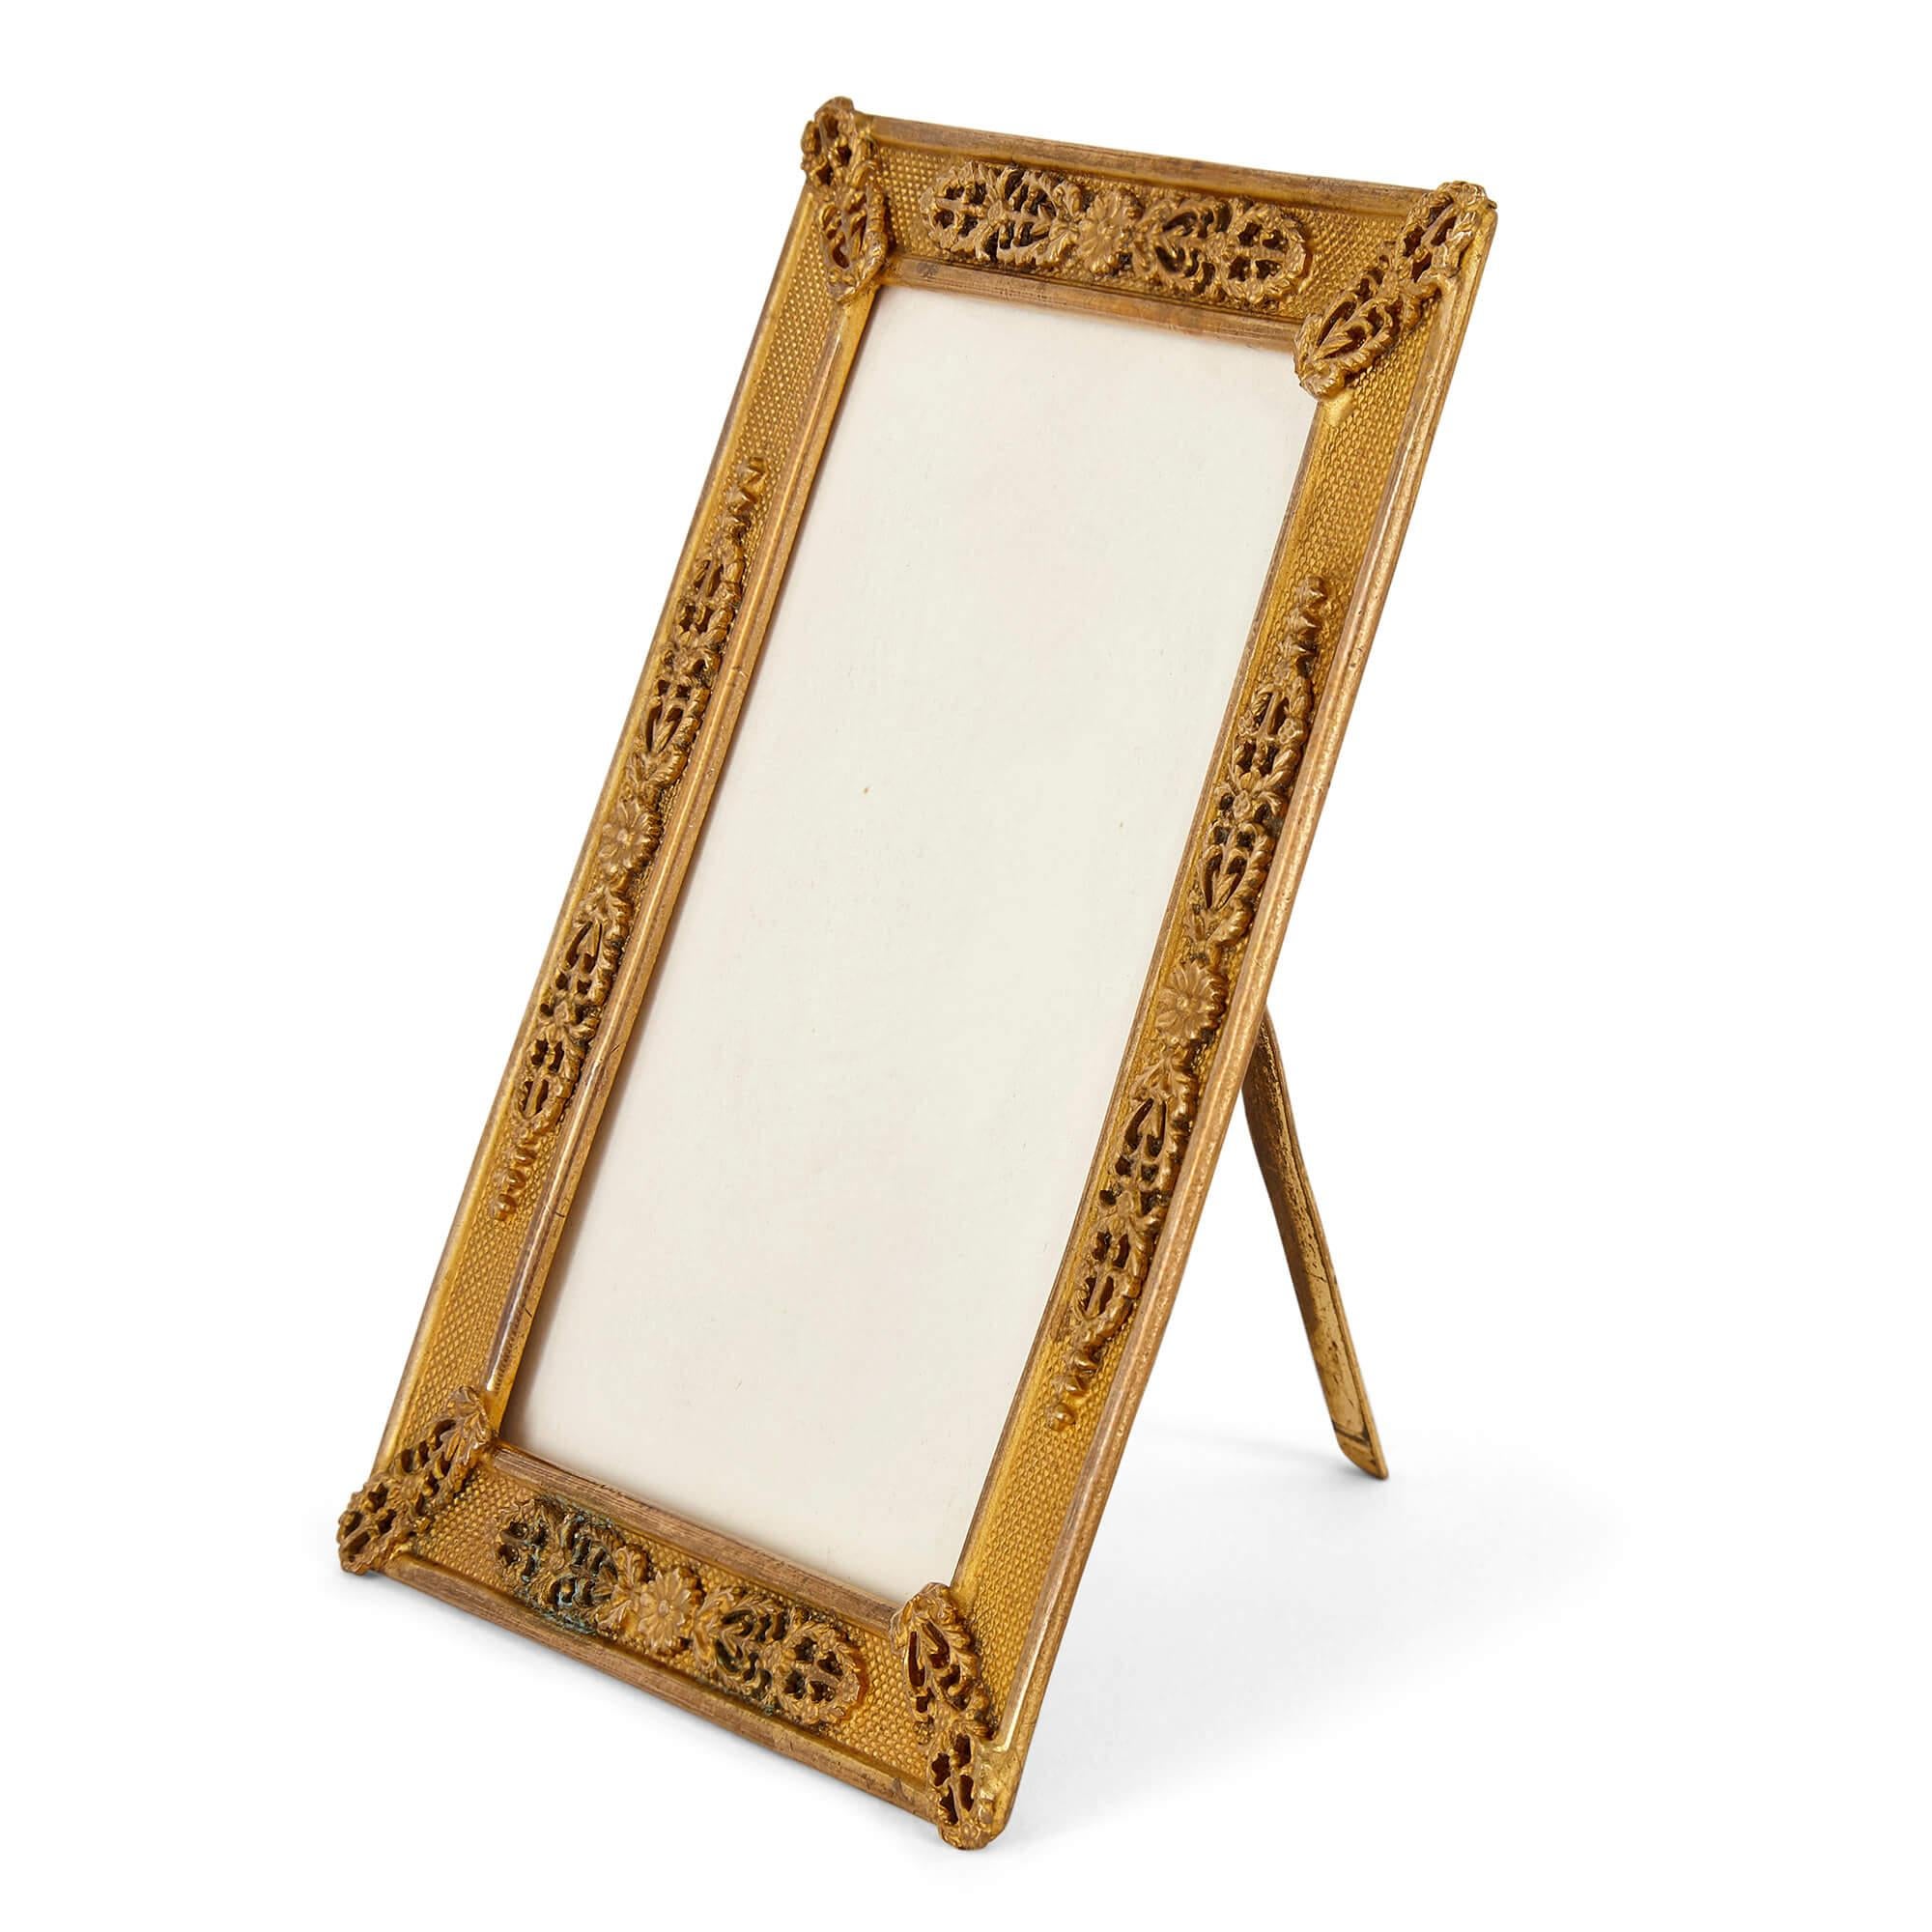 Empire gilt bronze picture frame
French, 19th Century
Measures: Height 11cm, width 8cm, depth 0.5cm

The rectangular picture frame features a stippled surface mounted with foliate and floral gilt bronze decorations in a classicising style to the